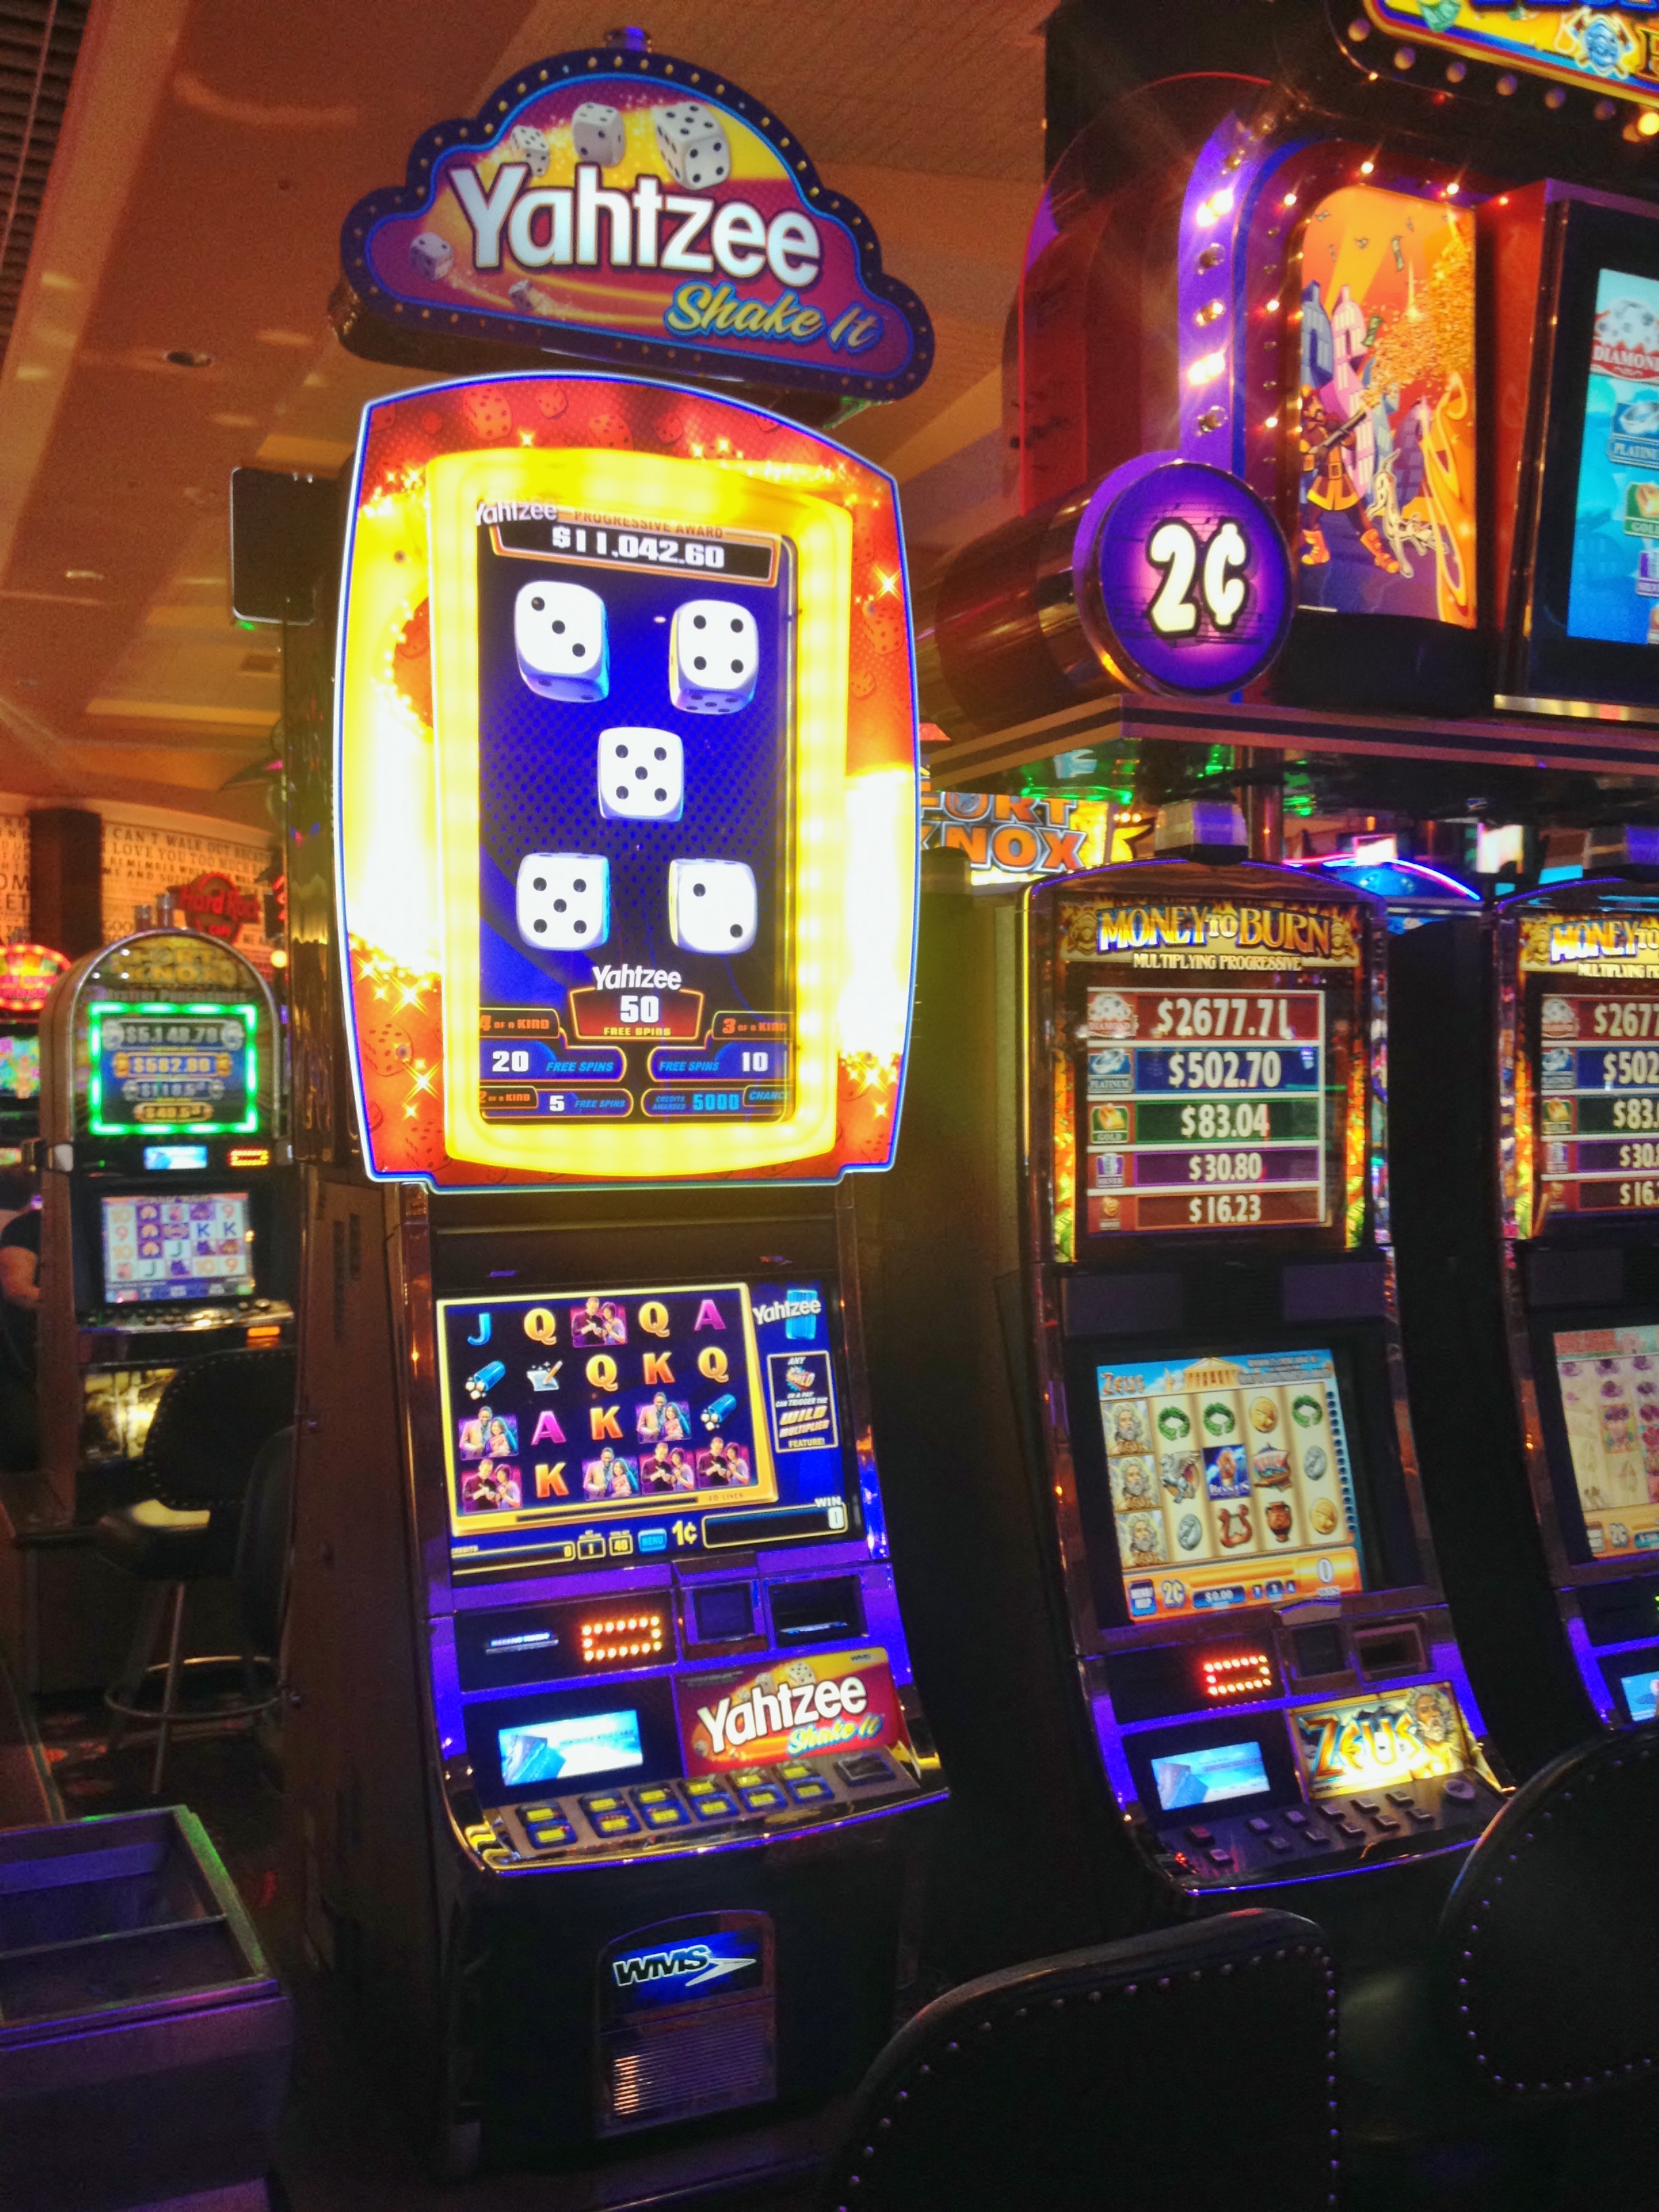 Best Video Slot Machines To Play